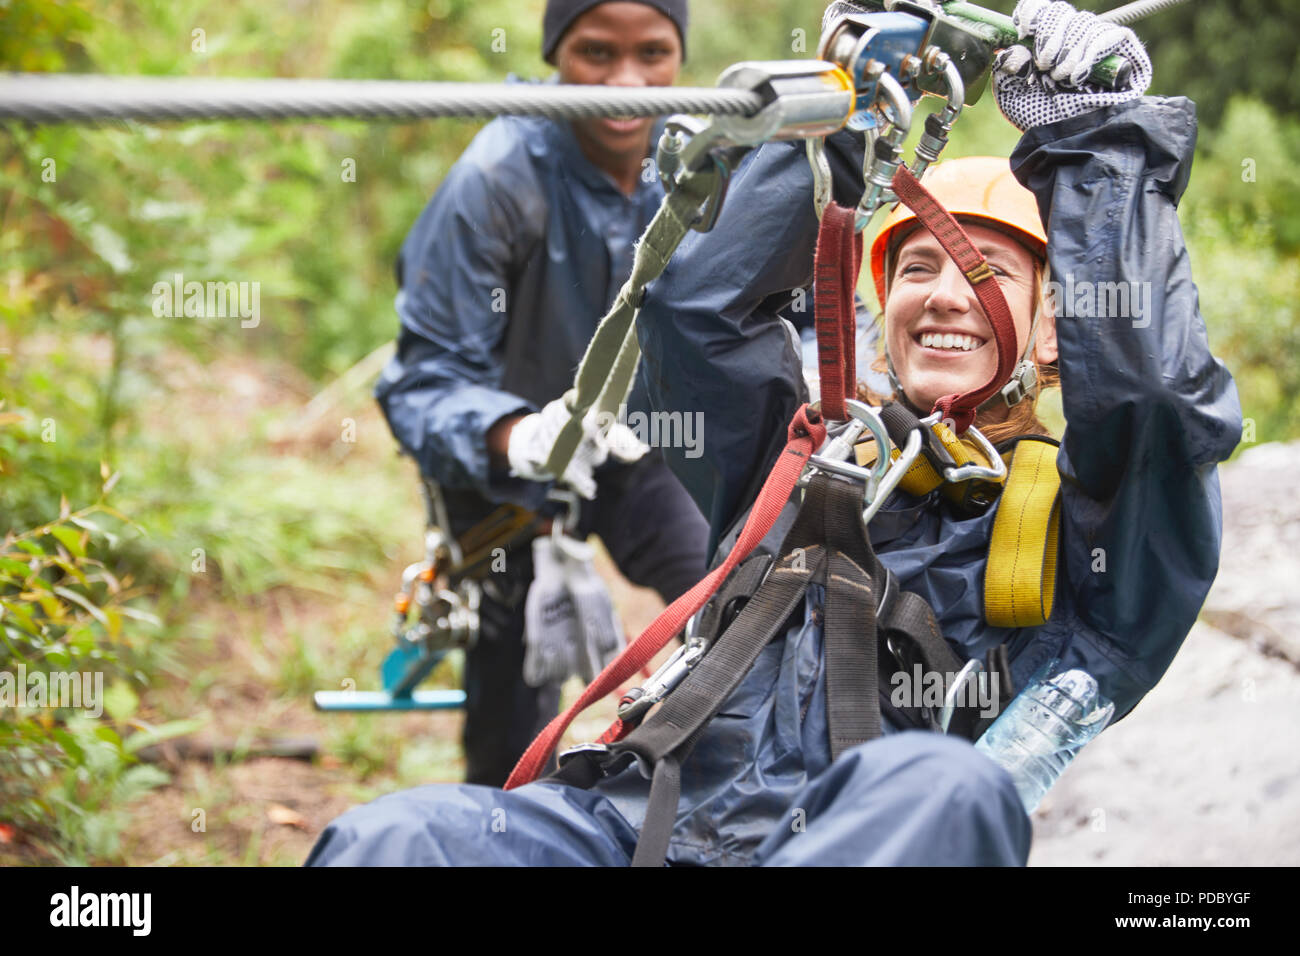 Smiling young woman zip lining Stock Photo